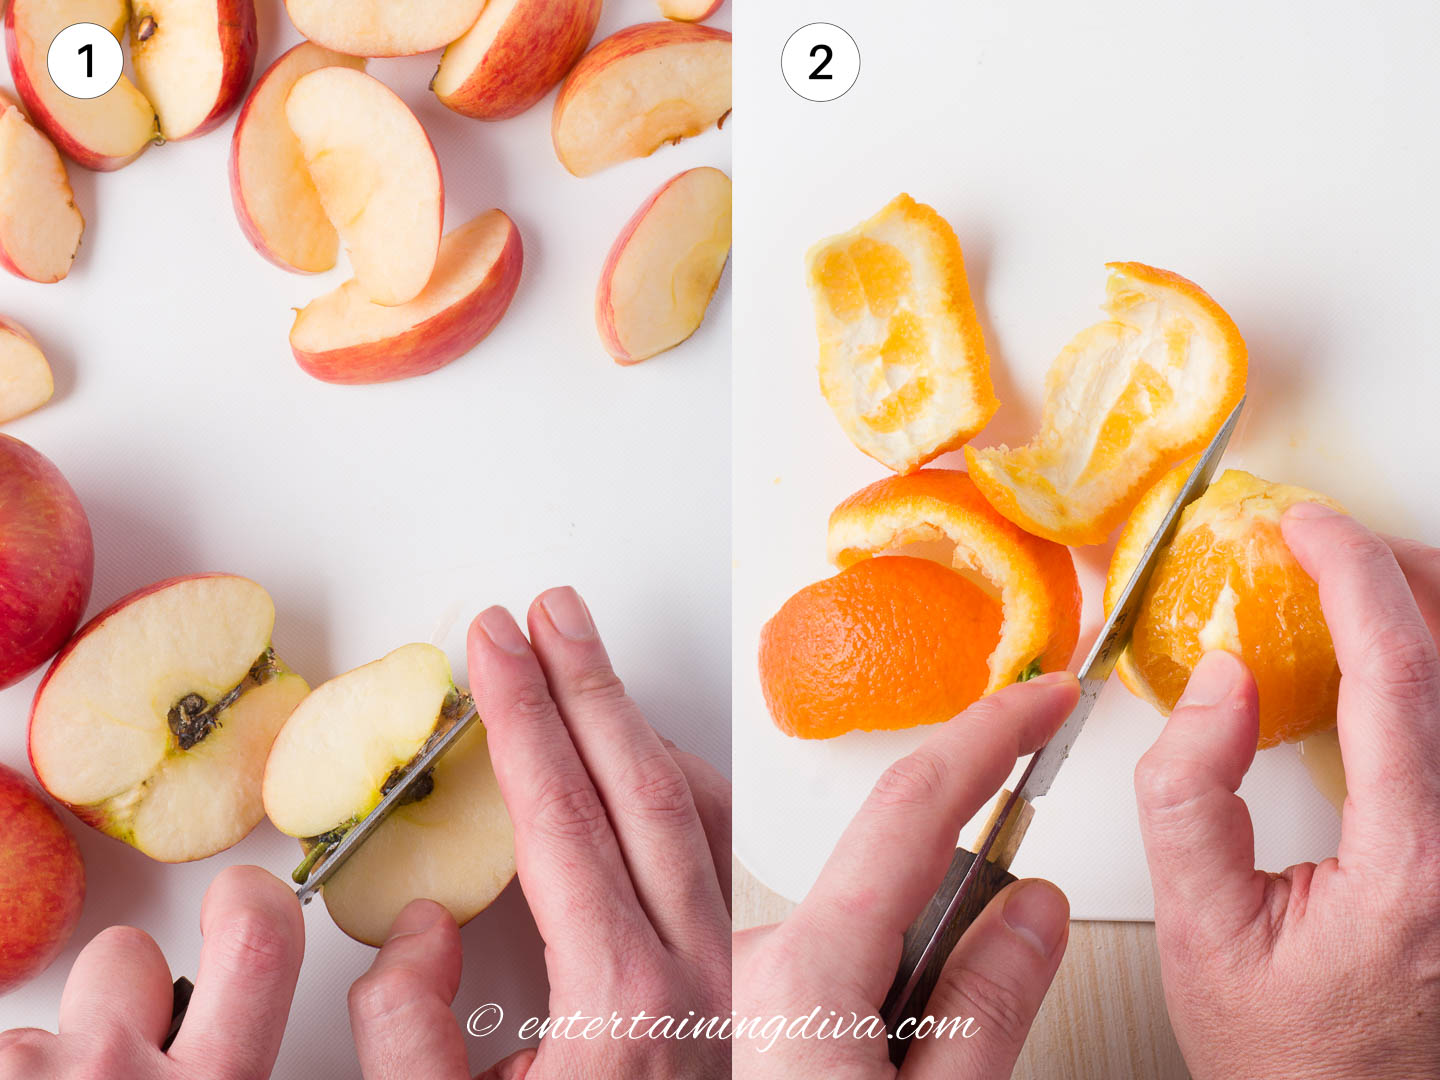 slicing apples and oranges on cutting board